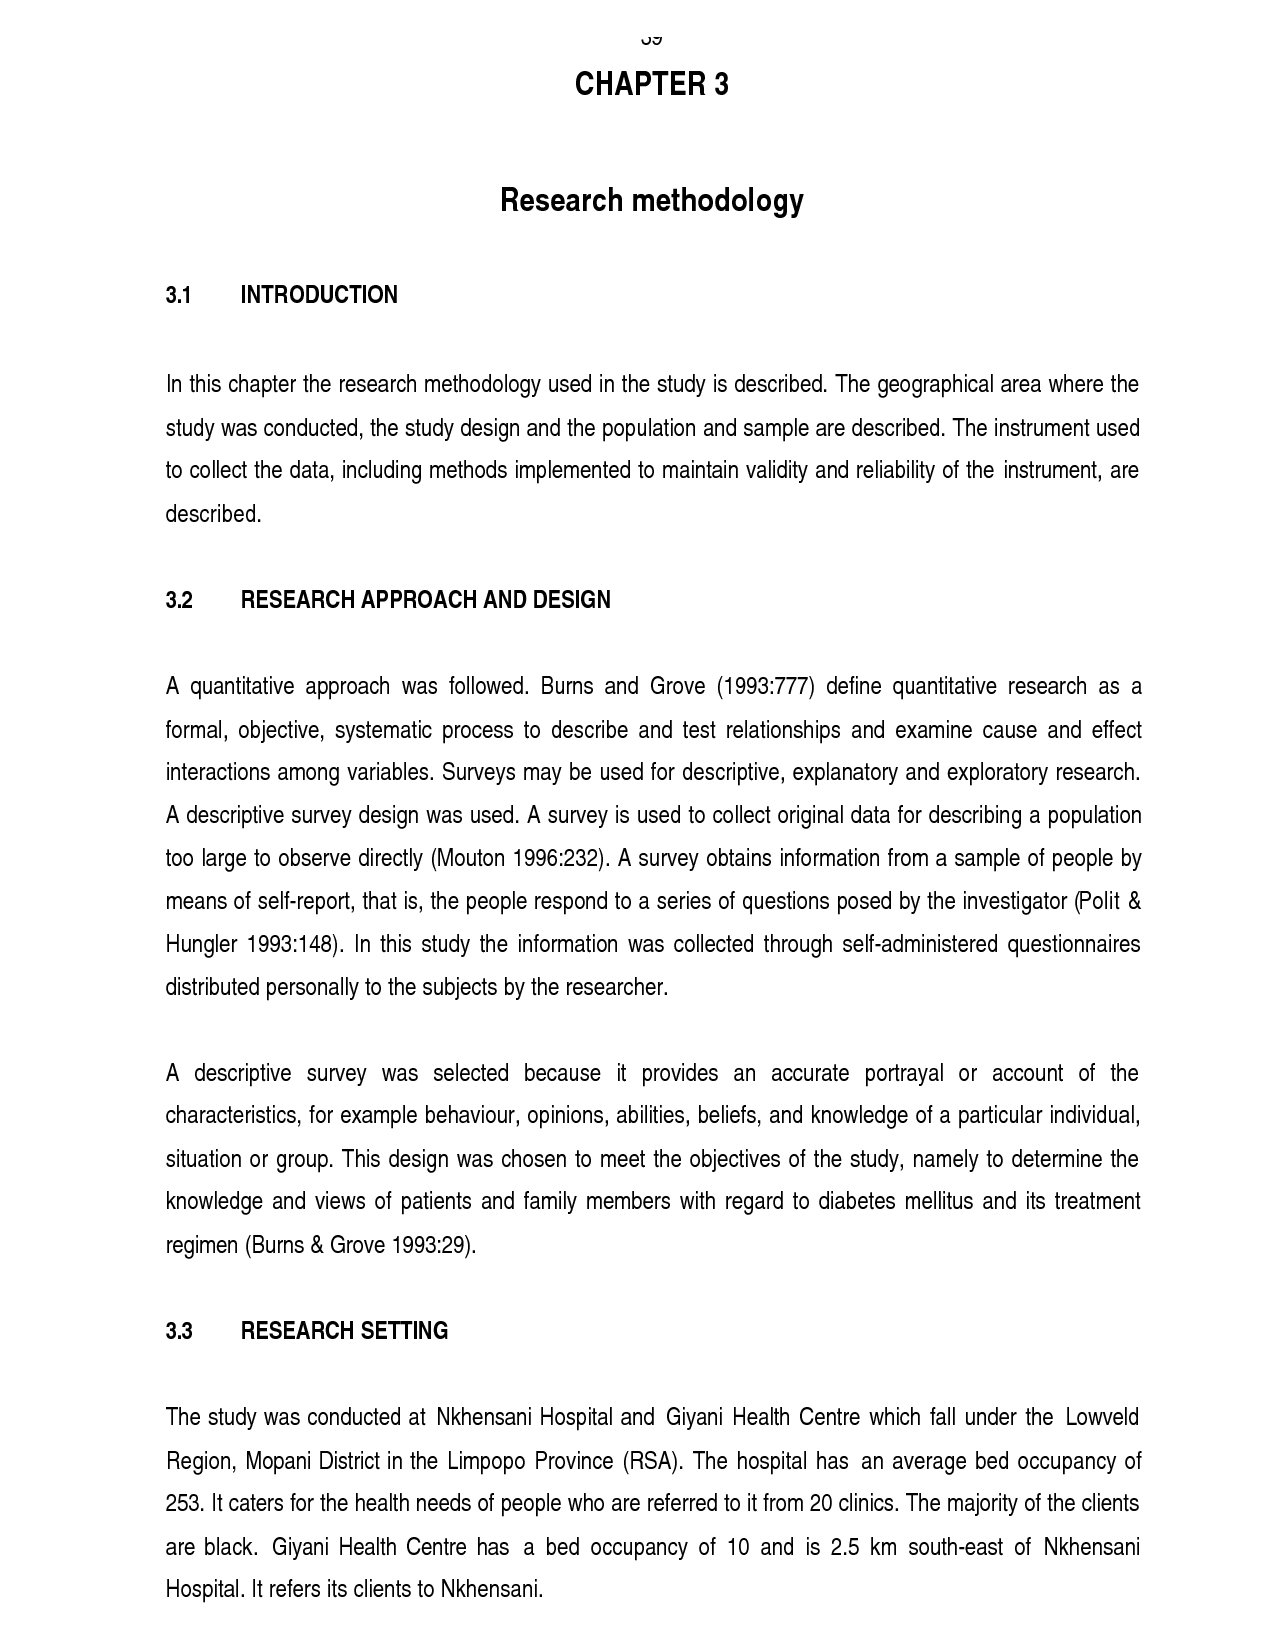 example of methods used in research paper